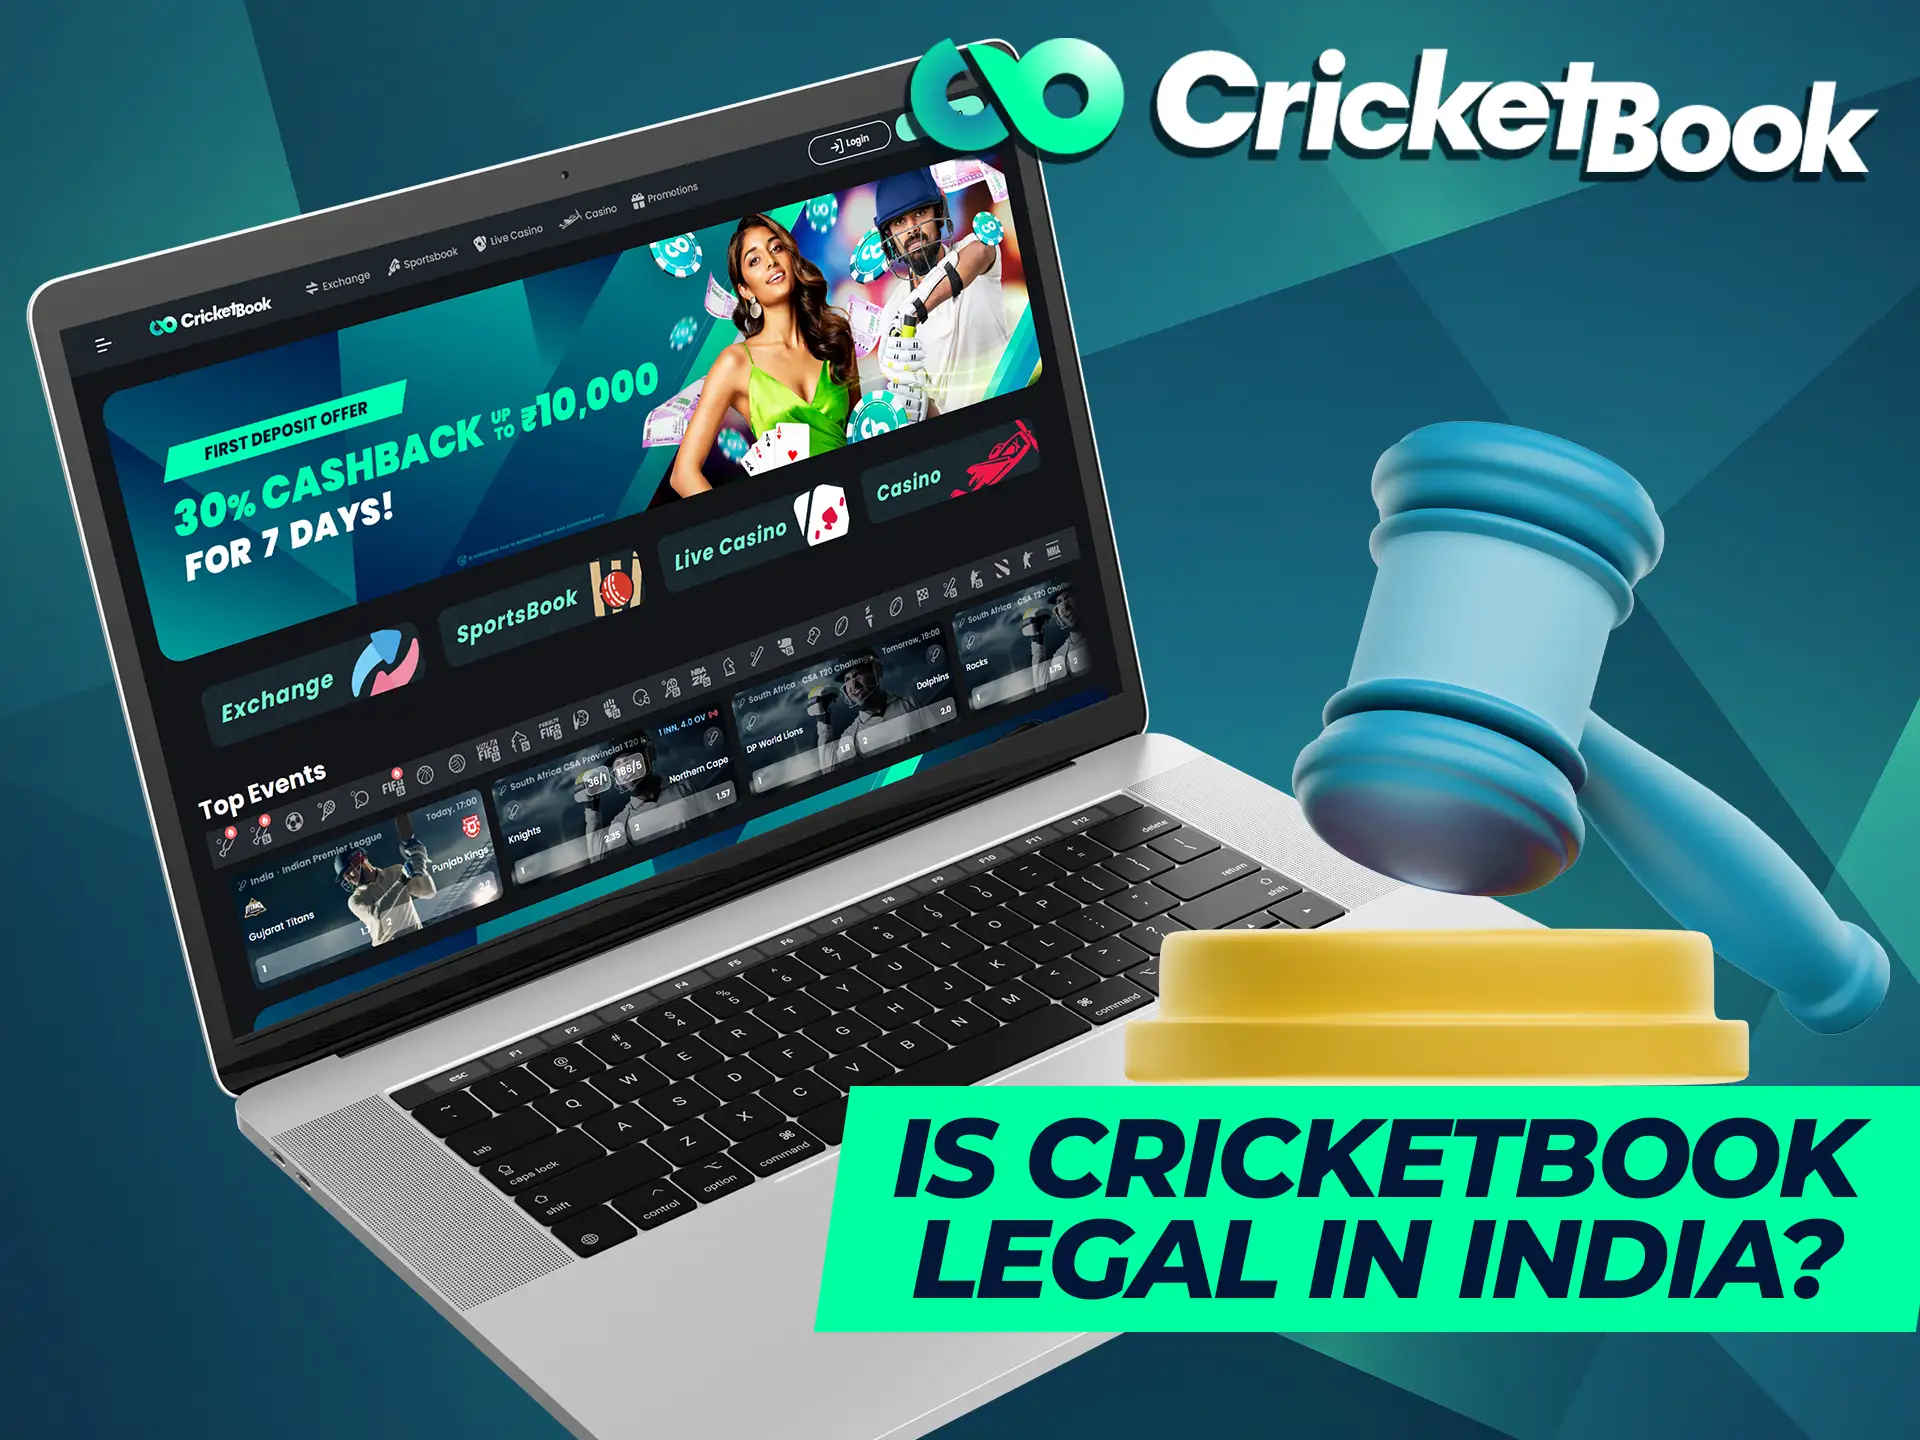 CricketBook operates legally in India.